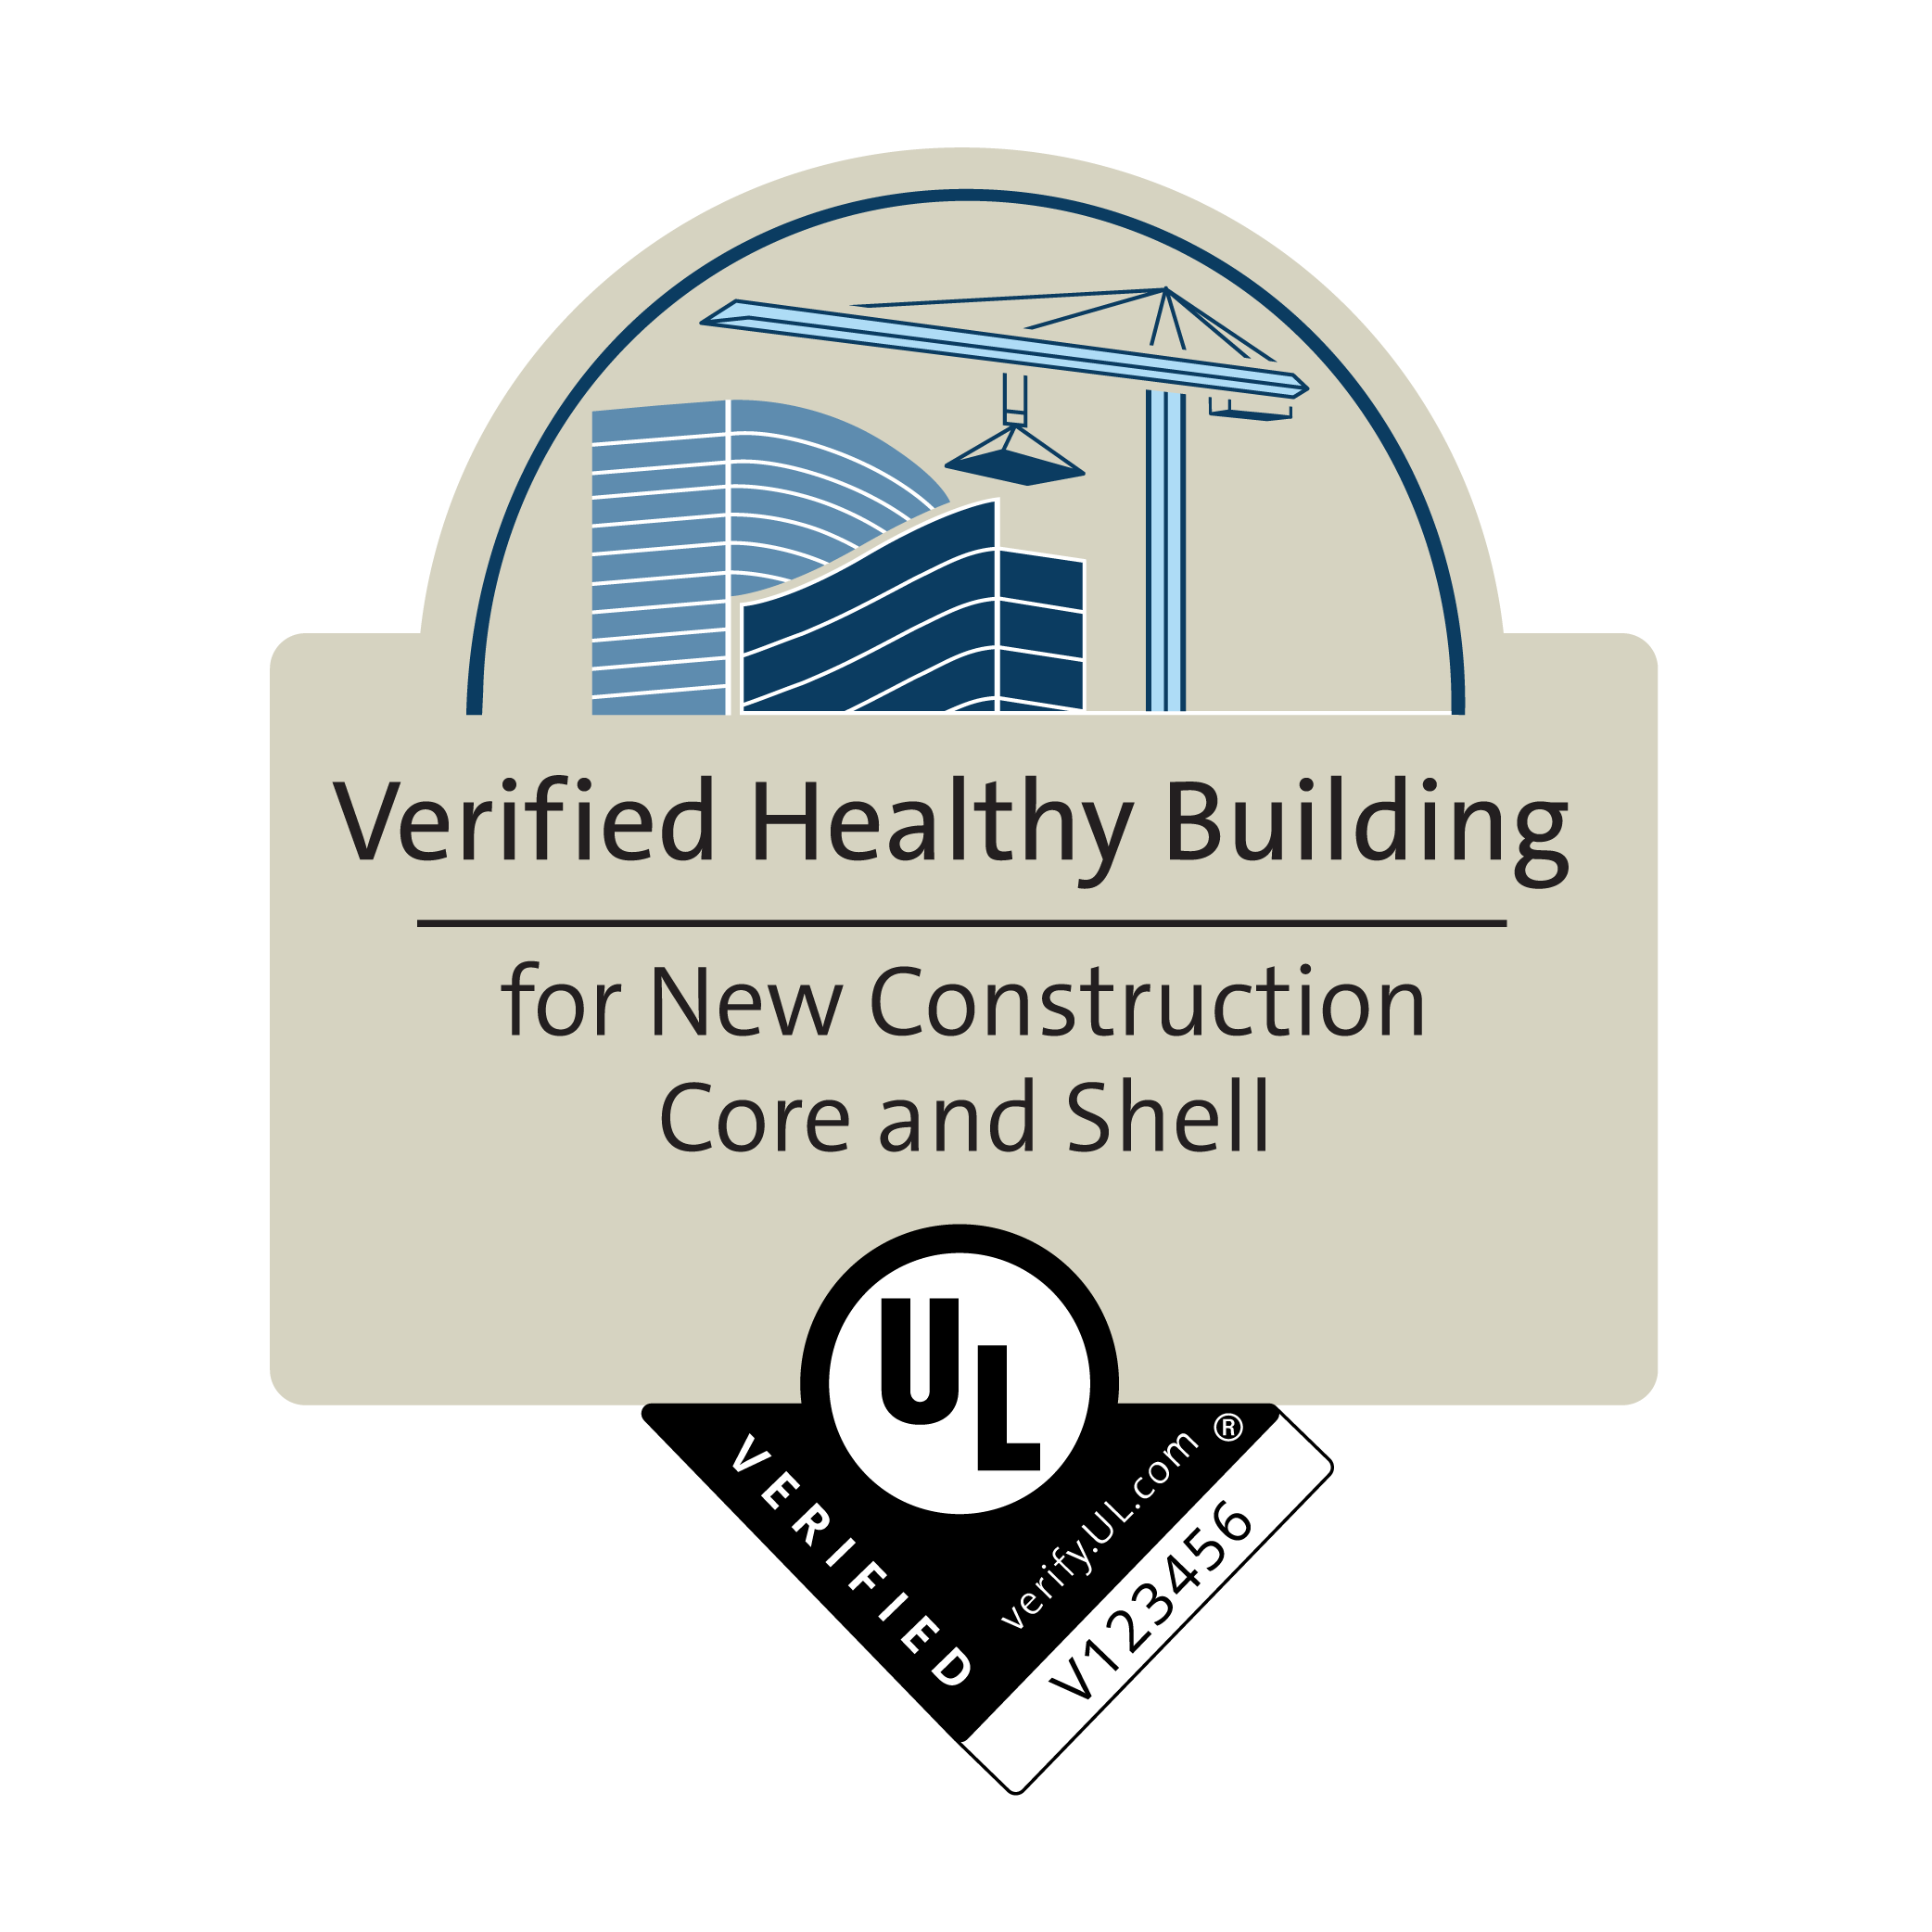 UL Verified Healthy Building for New Construction Core and Shell; 新建築核心與外殼的 UL 健康建築驗證